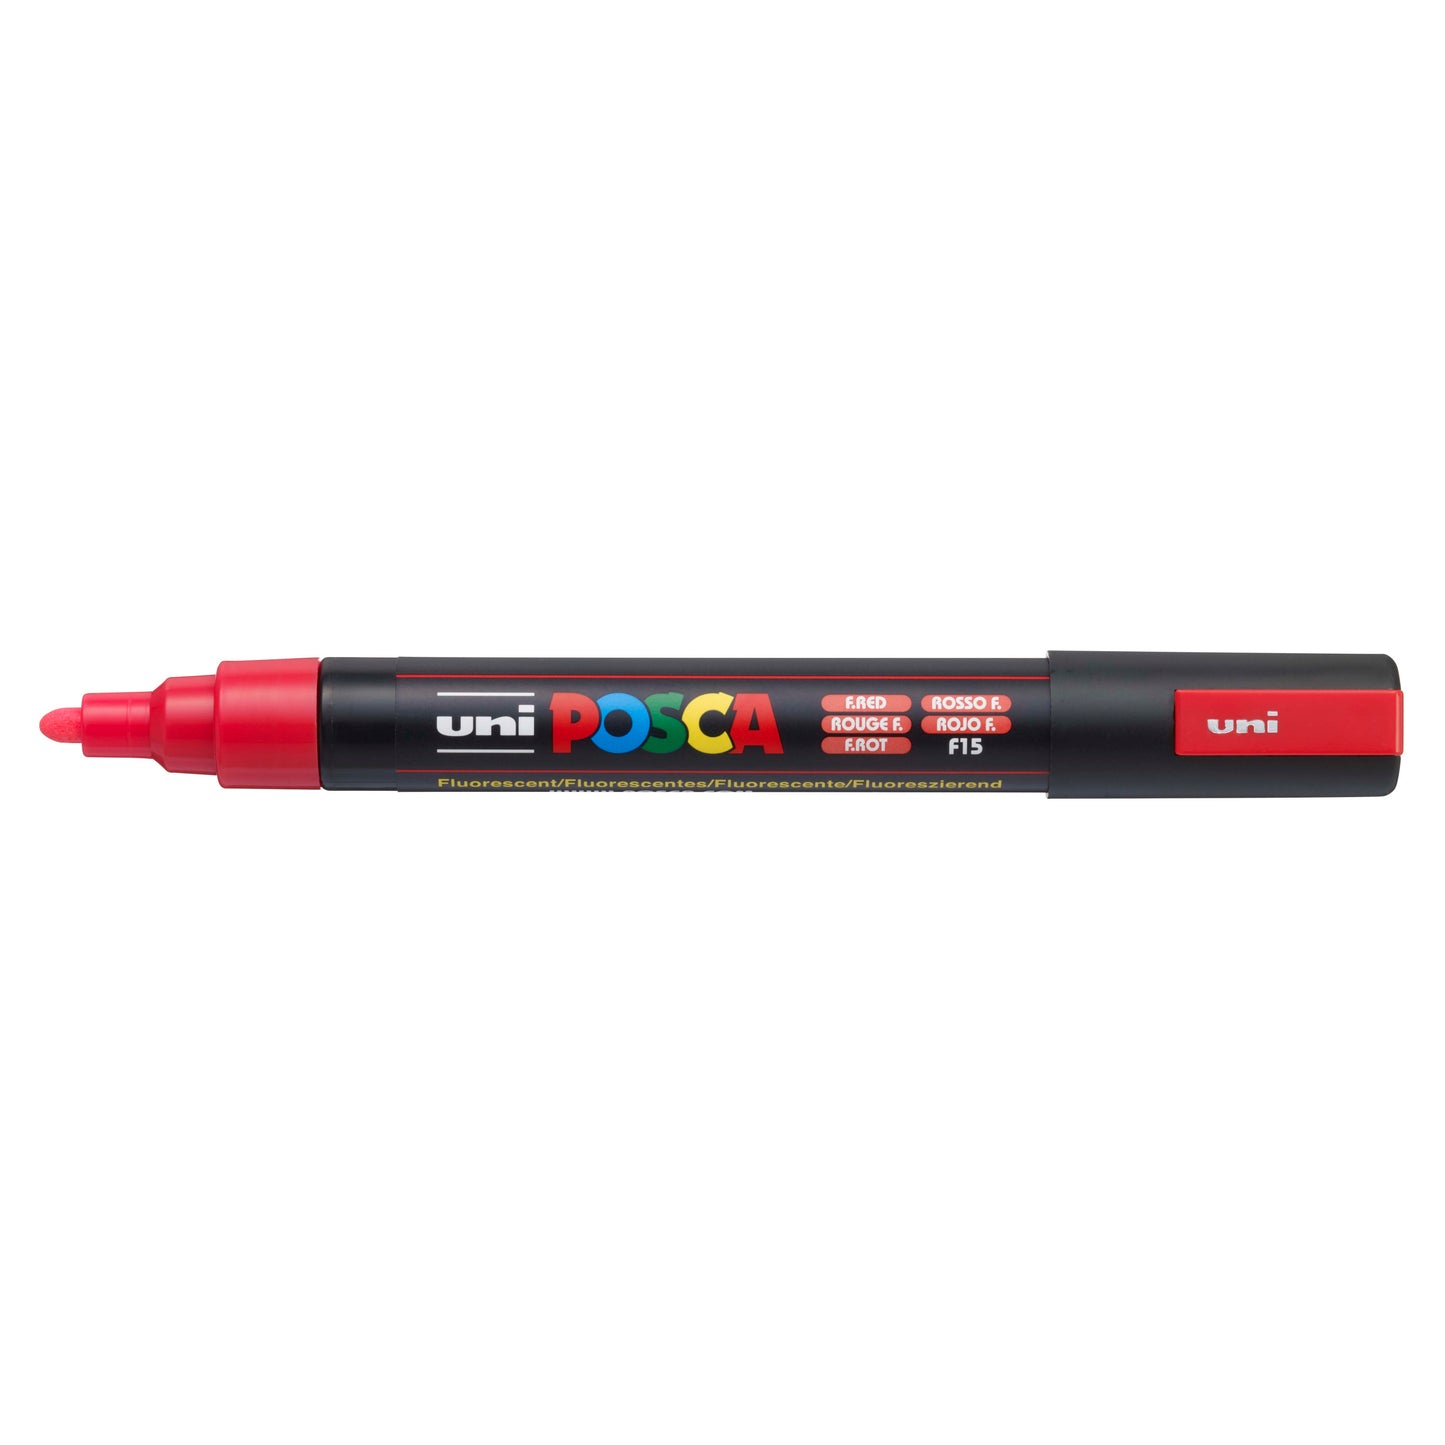 POSCA Acrylic Paint Markers - PC-5M Bullet Tip - Red by POSCA - K. A. Artist Shop